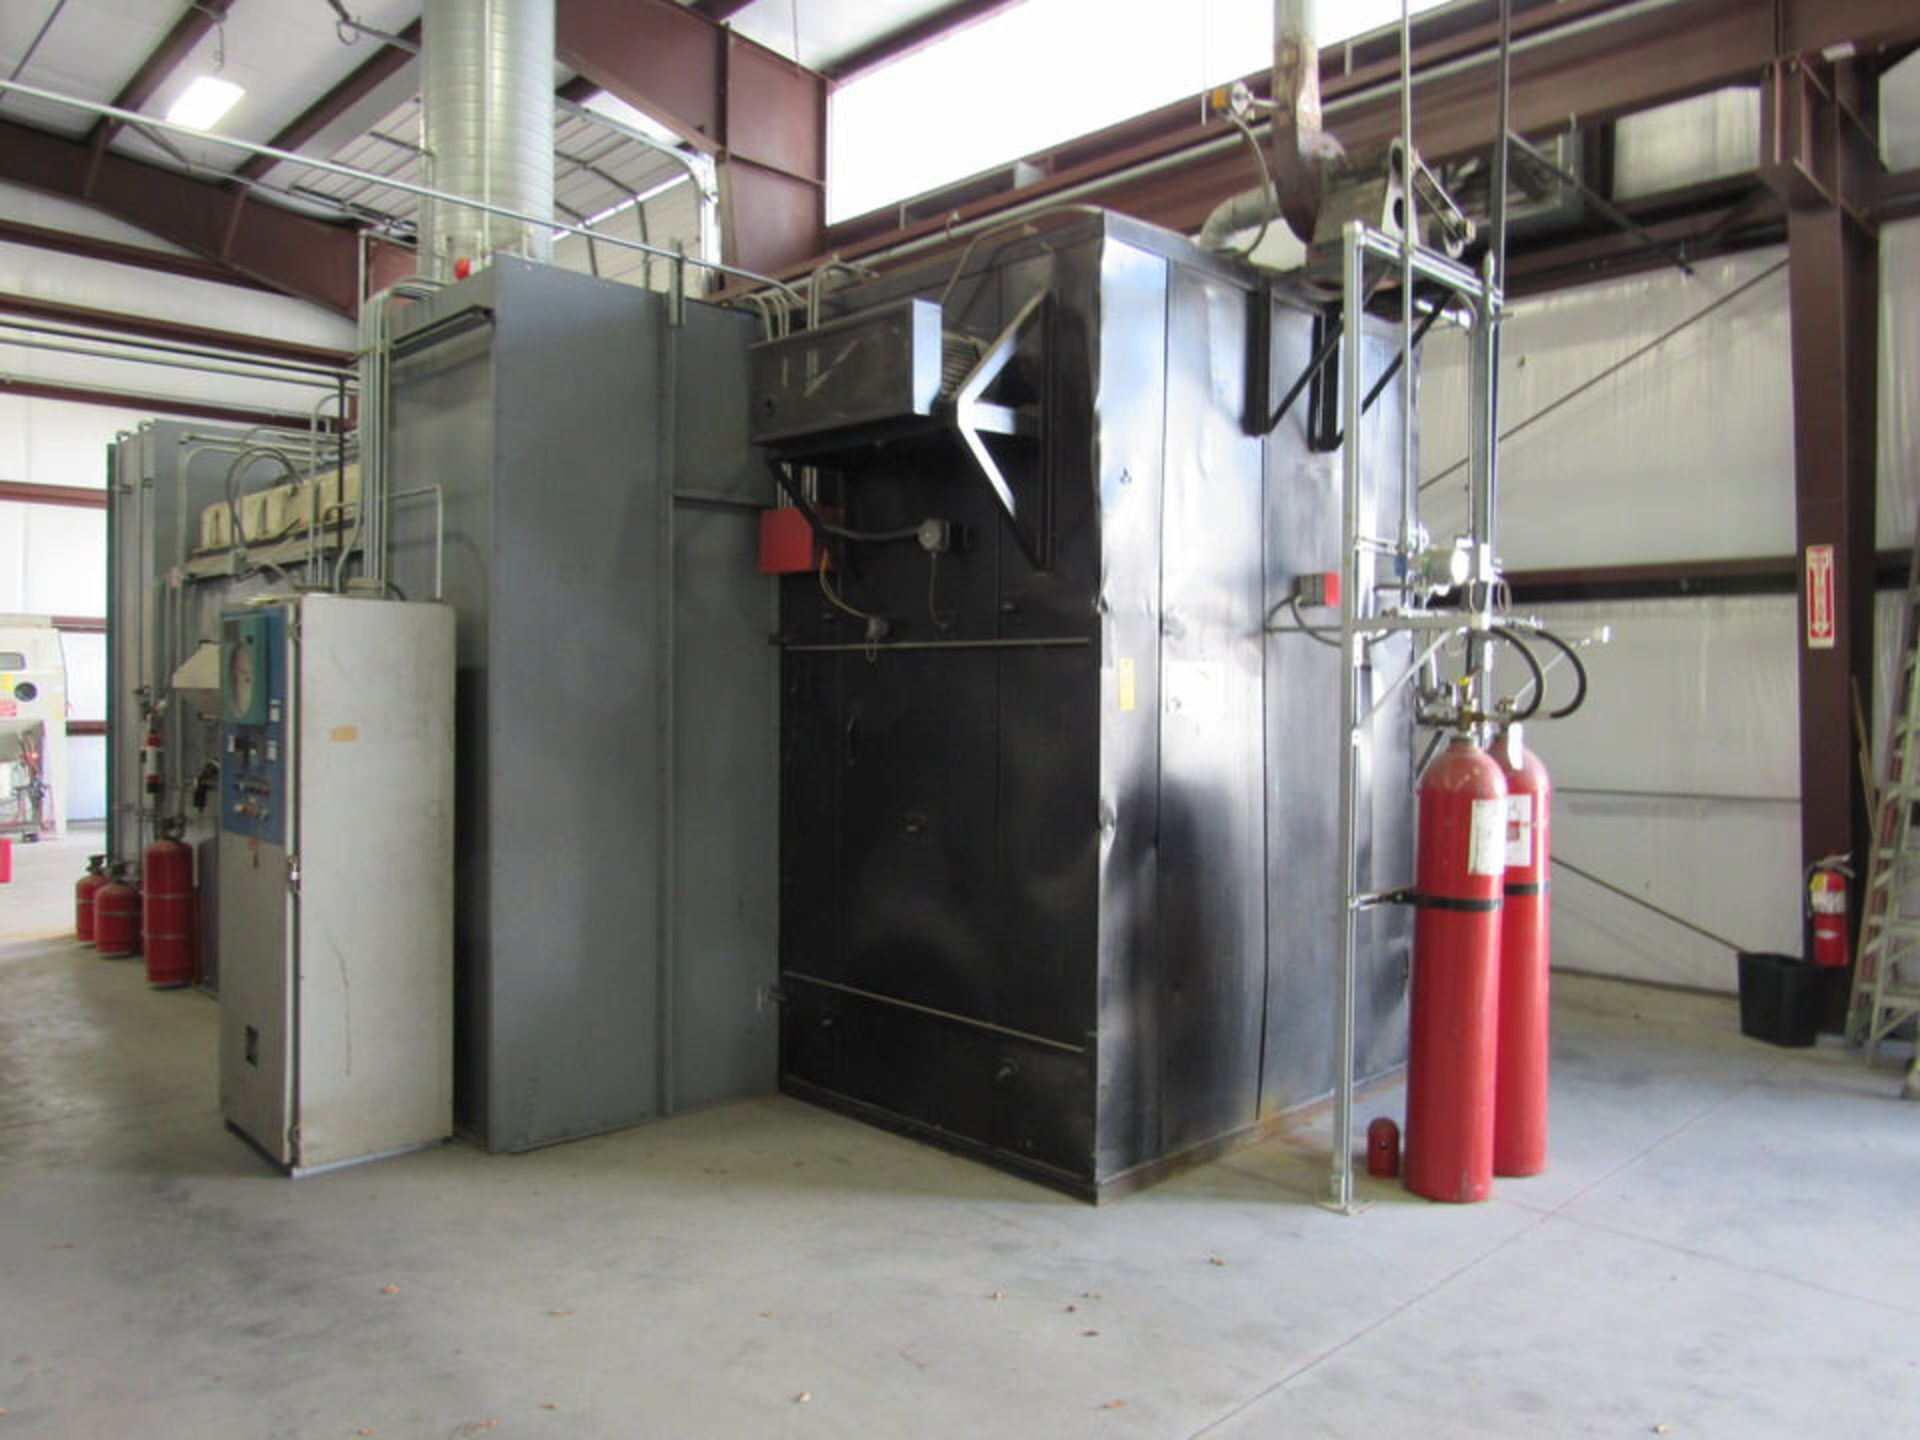 Large Capacity Self-Contained Paint Booth with integrated Bake/Curing Electric Oven. - Image 4 of 14